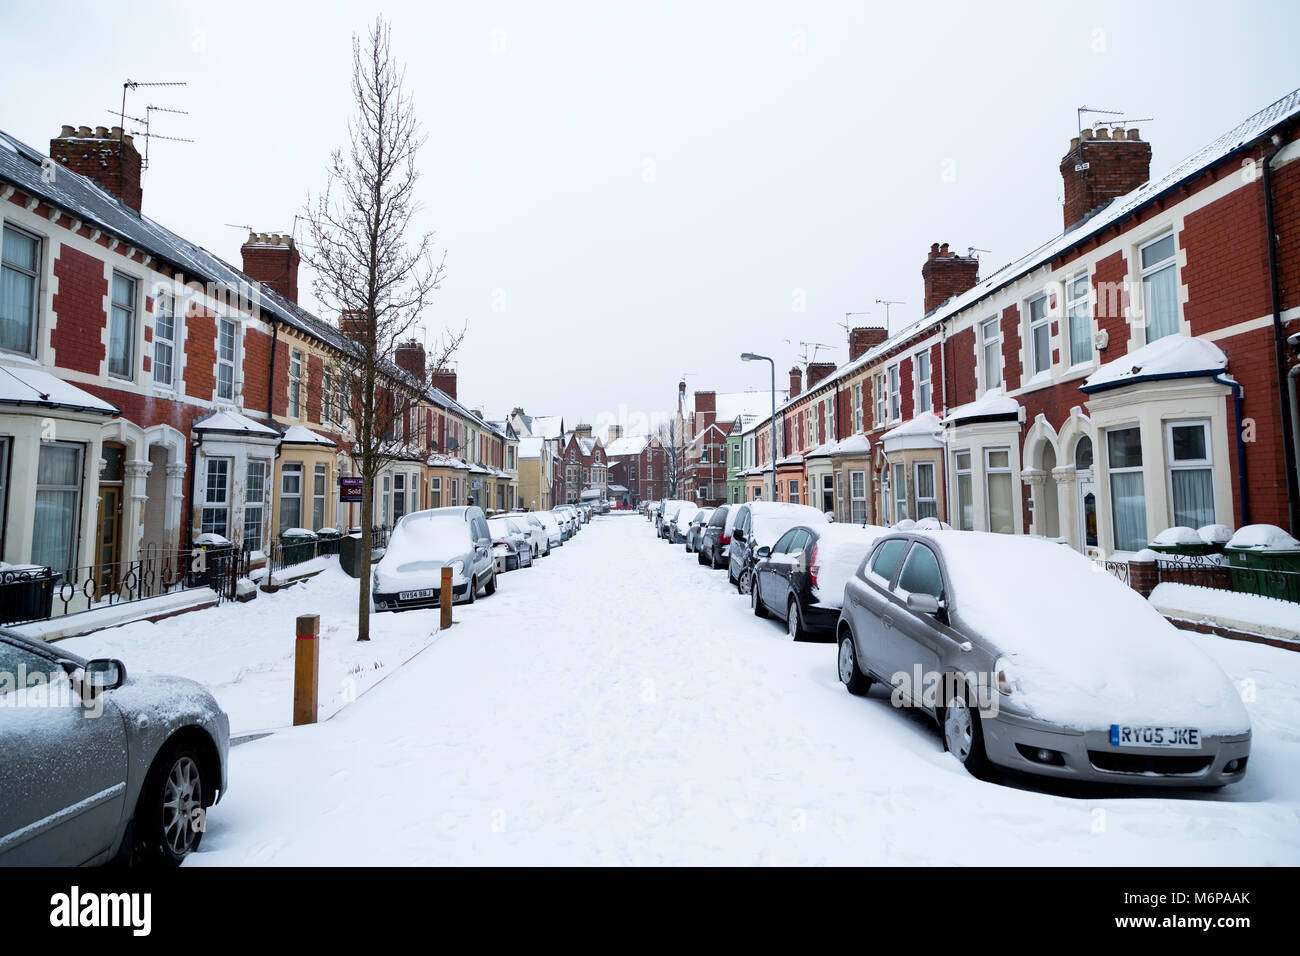 Grangetown Cardiff covered in Snow Stock Photo